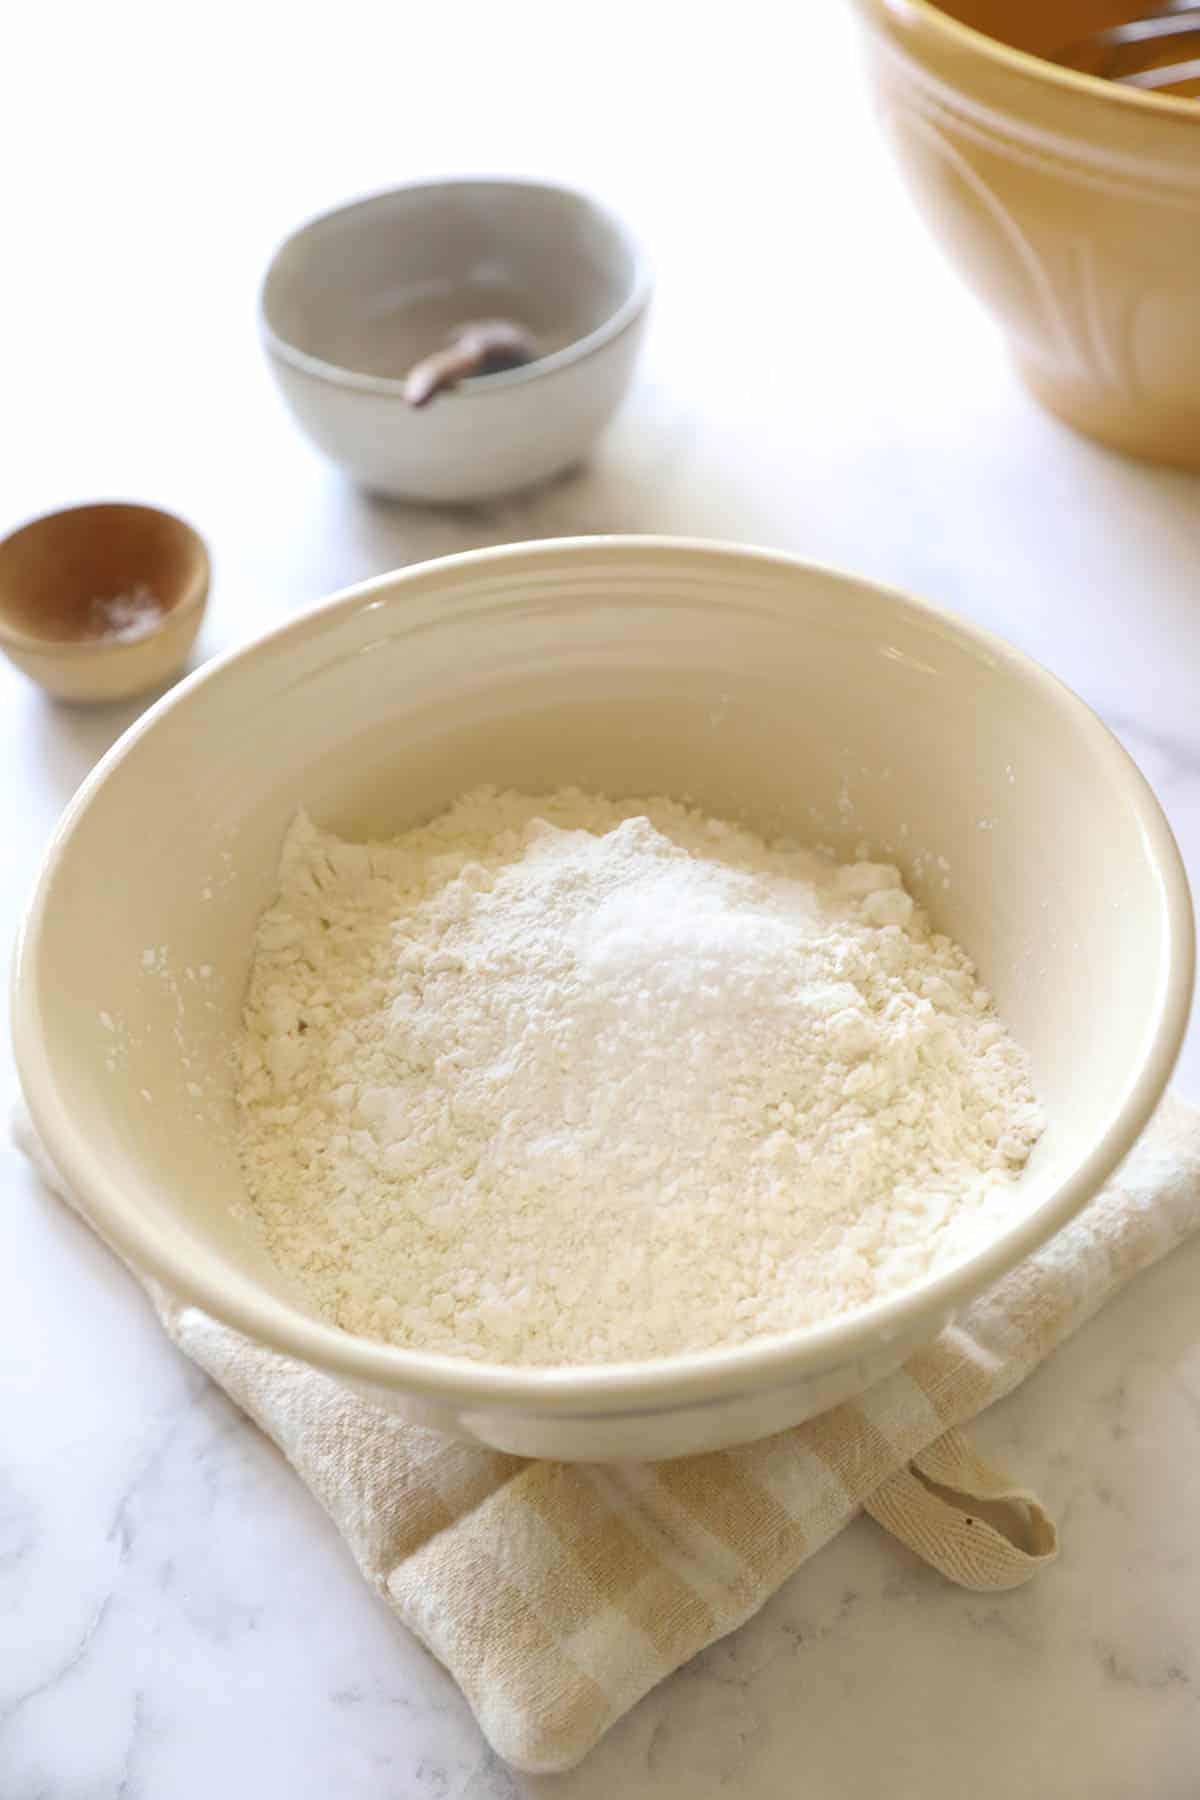 Flour and dry ingredients in a bowl